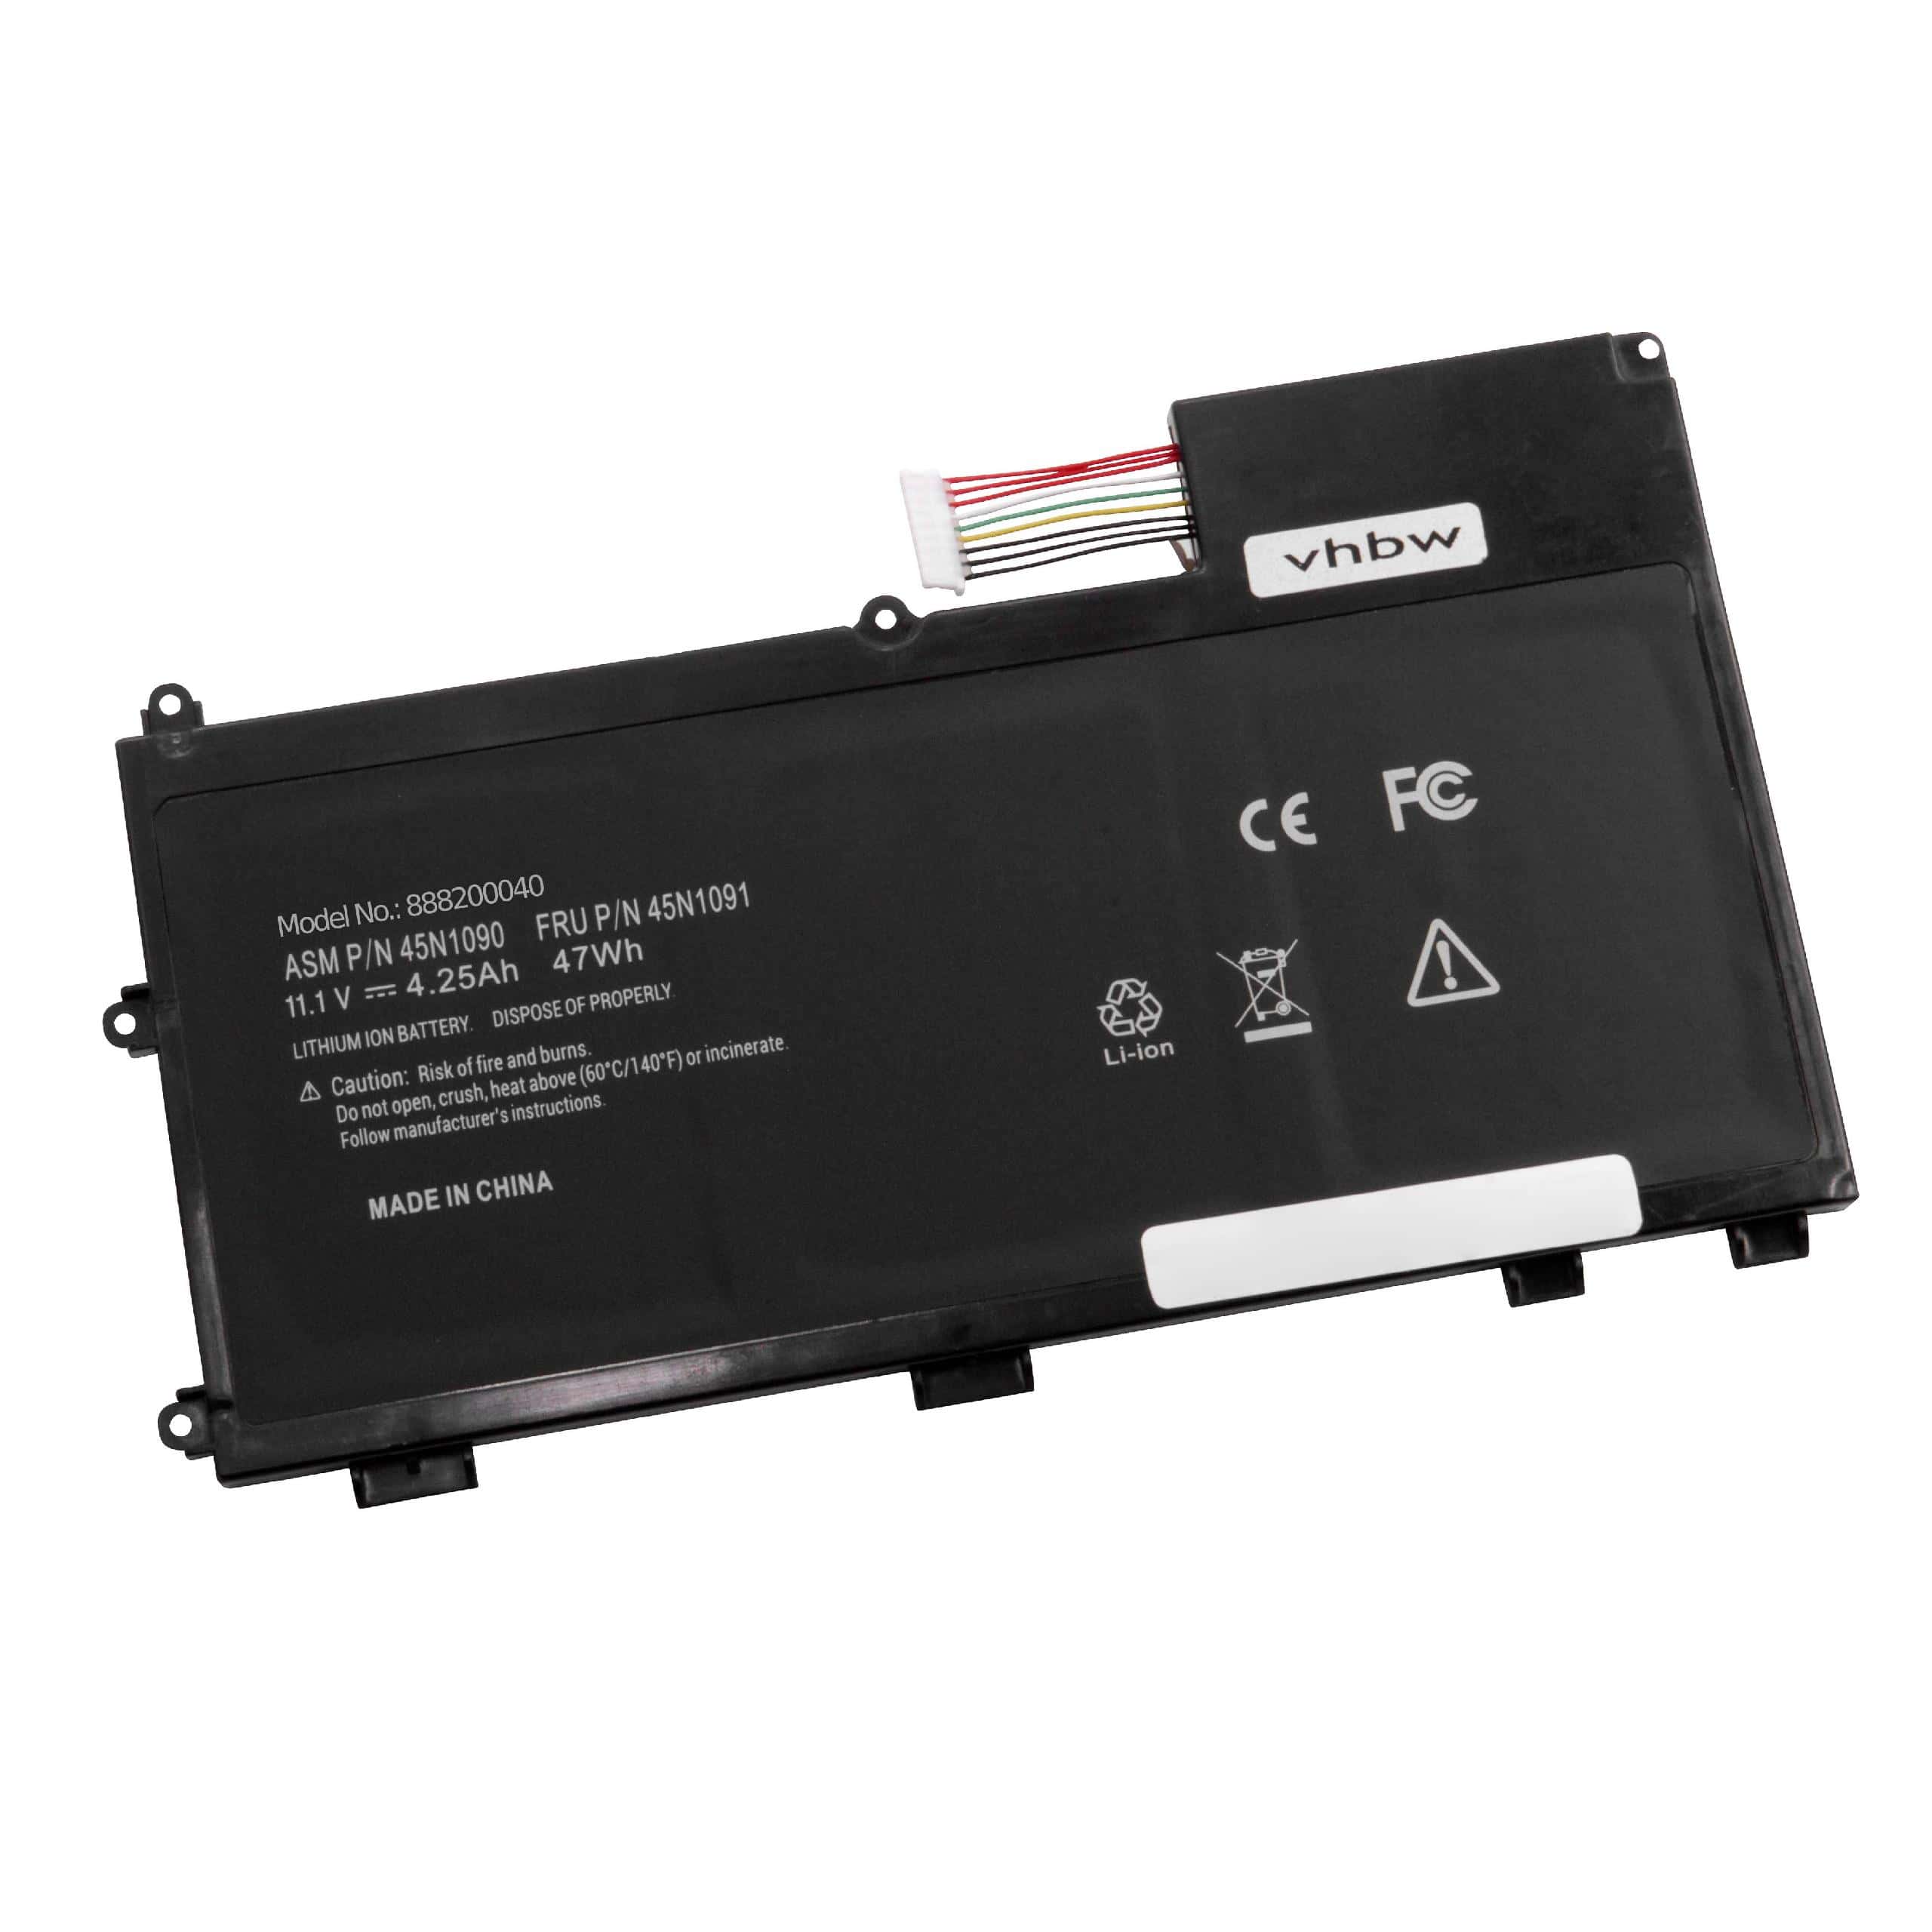 Notebook Battery Replacement for Lenovo 45N1088, 121500077, 3ICP7/64/84, 45N1089 - 4250mAh 11.1V Li-Ion